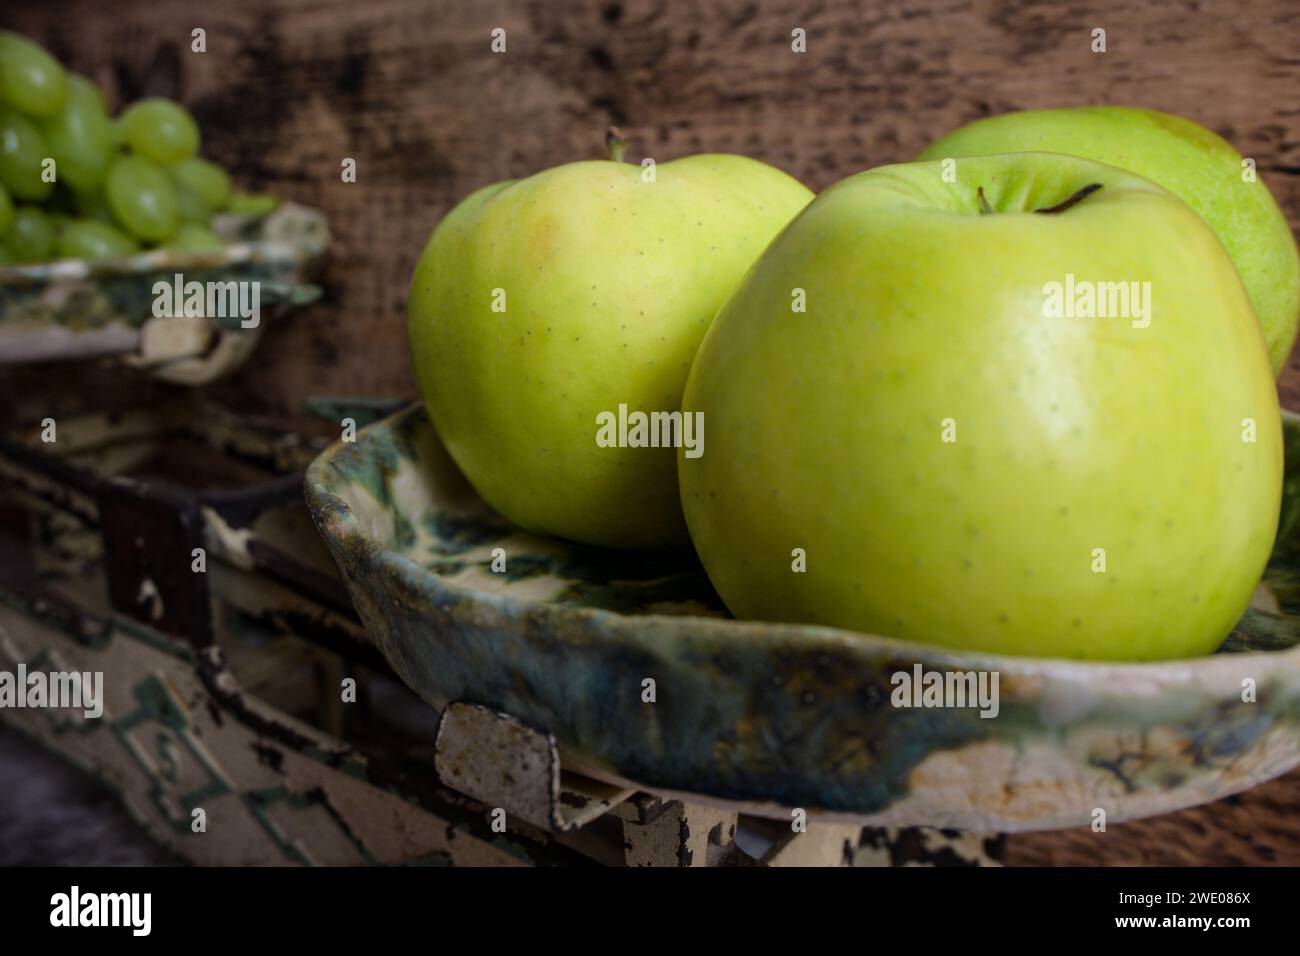 green grapes and apples on a retro scale, wooden background. Stock Photo